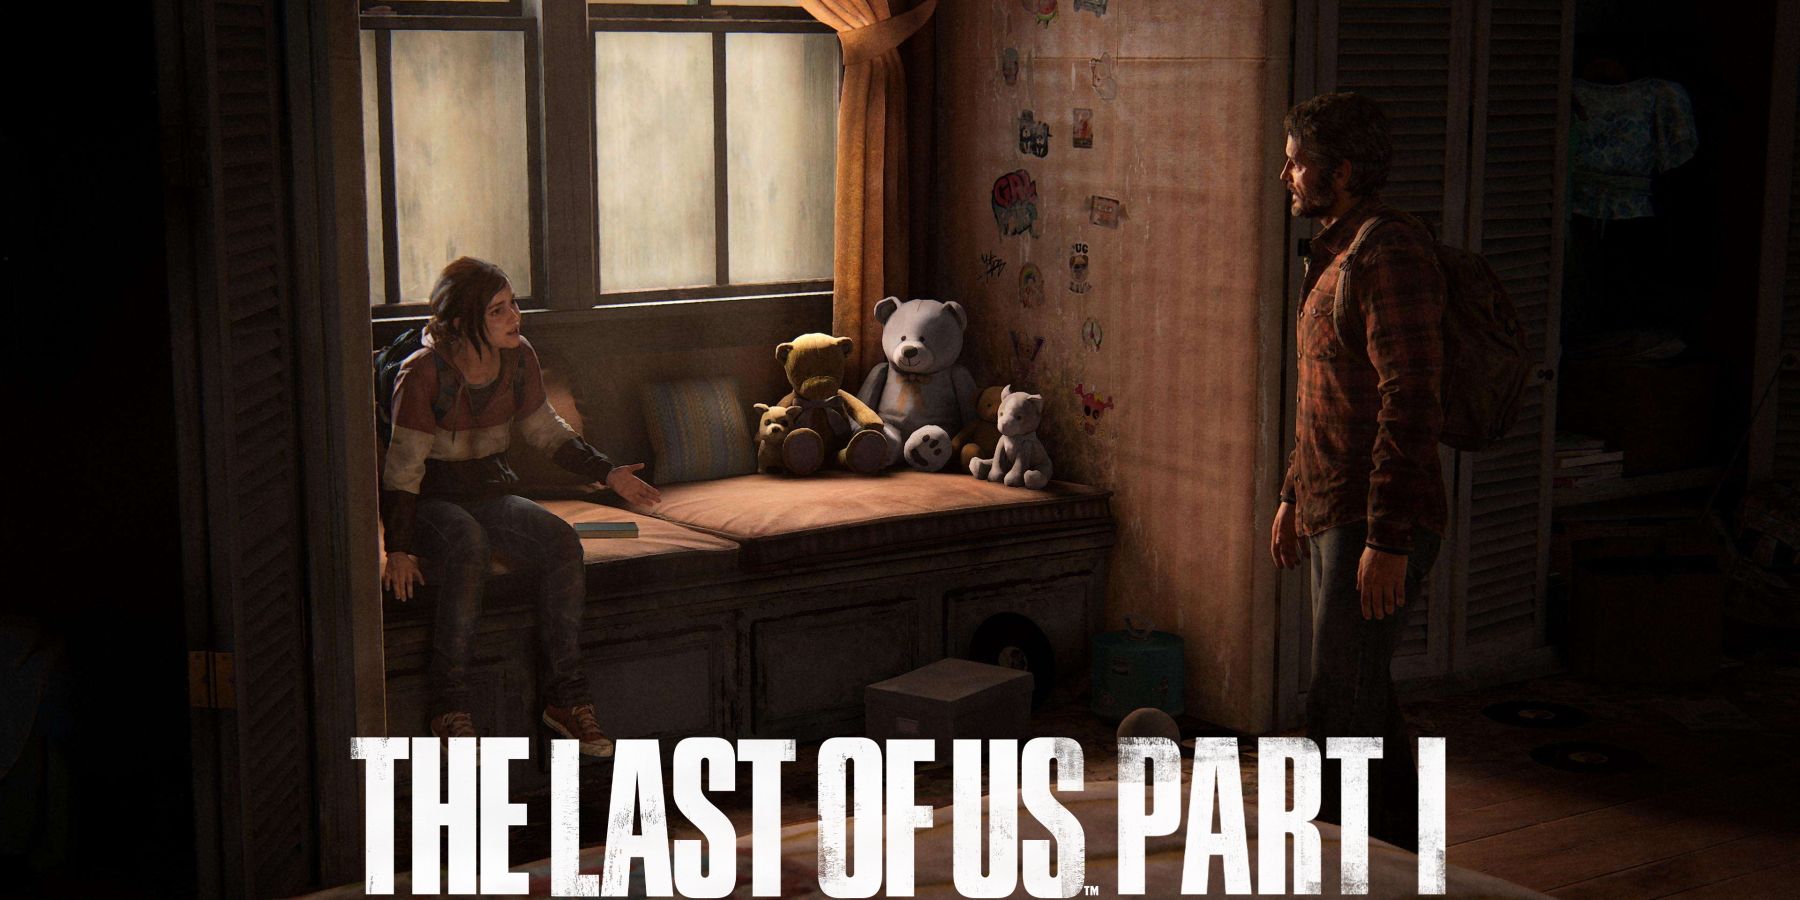 Replying to @Eli “there's only room for one Last of Us™ in this